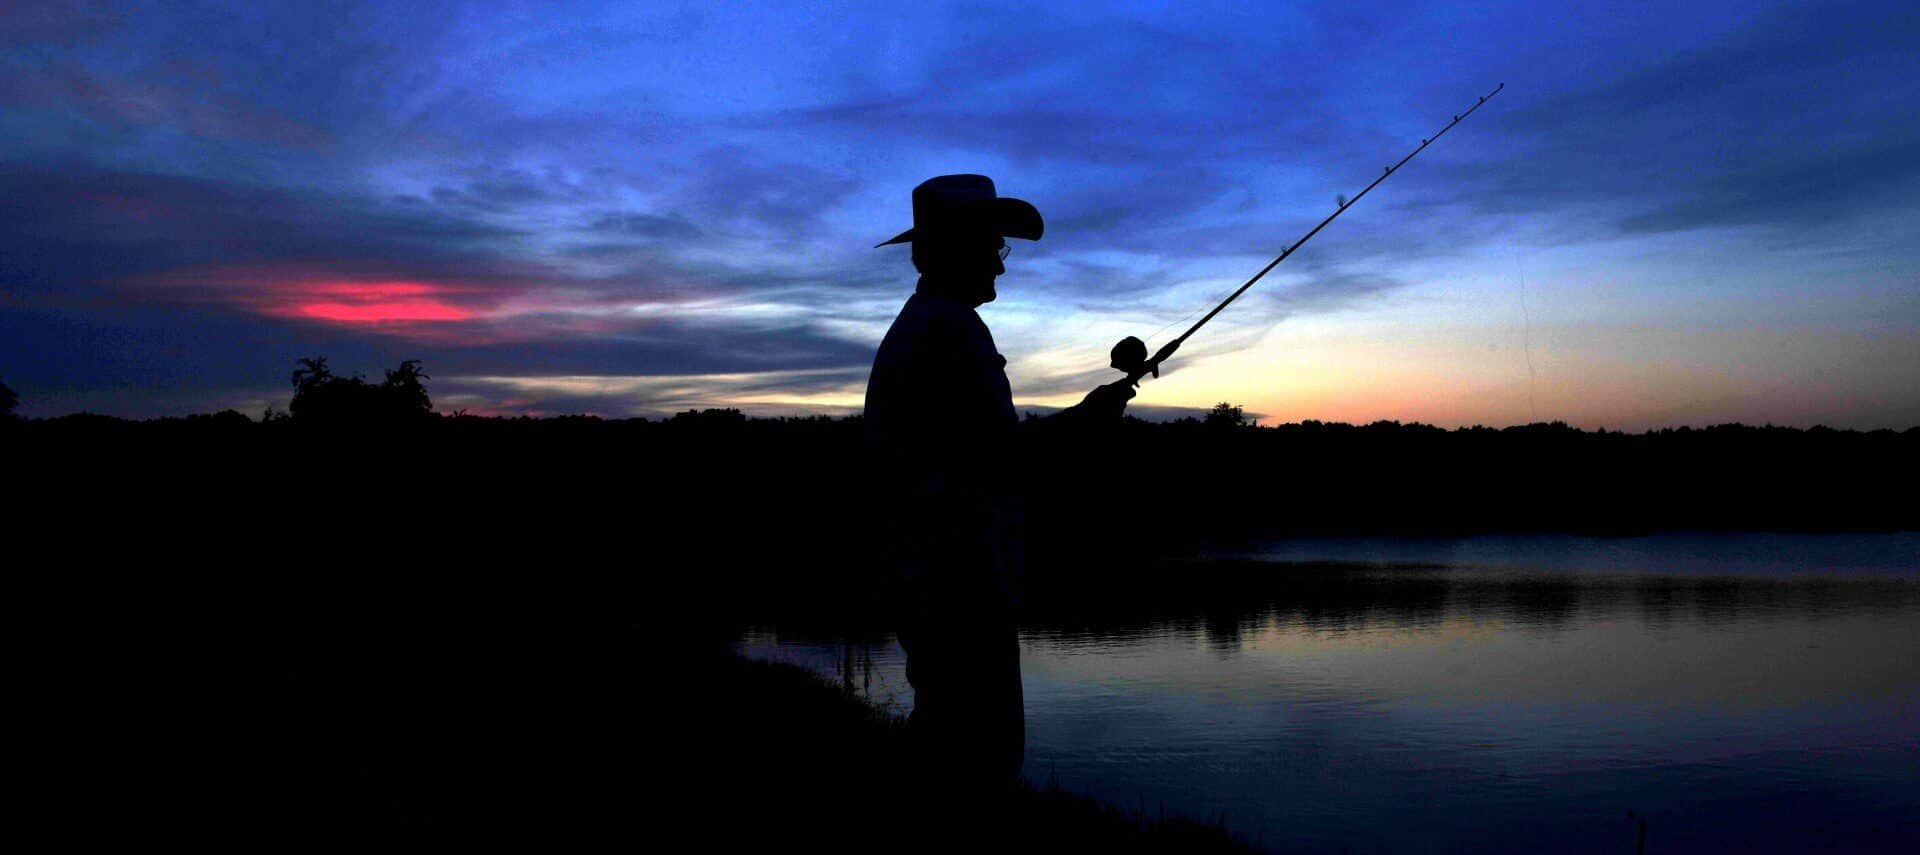 The silhouette of a man fishing on a pond at sunset